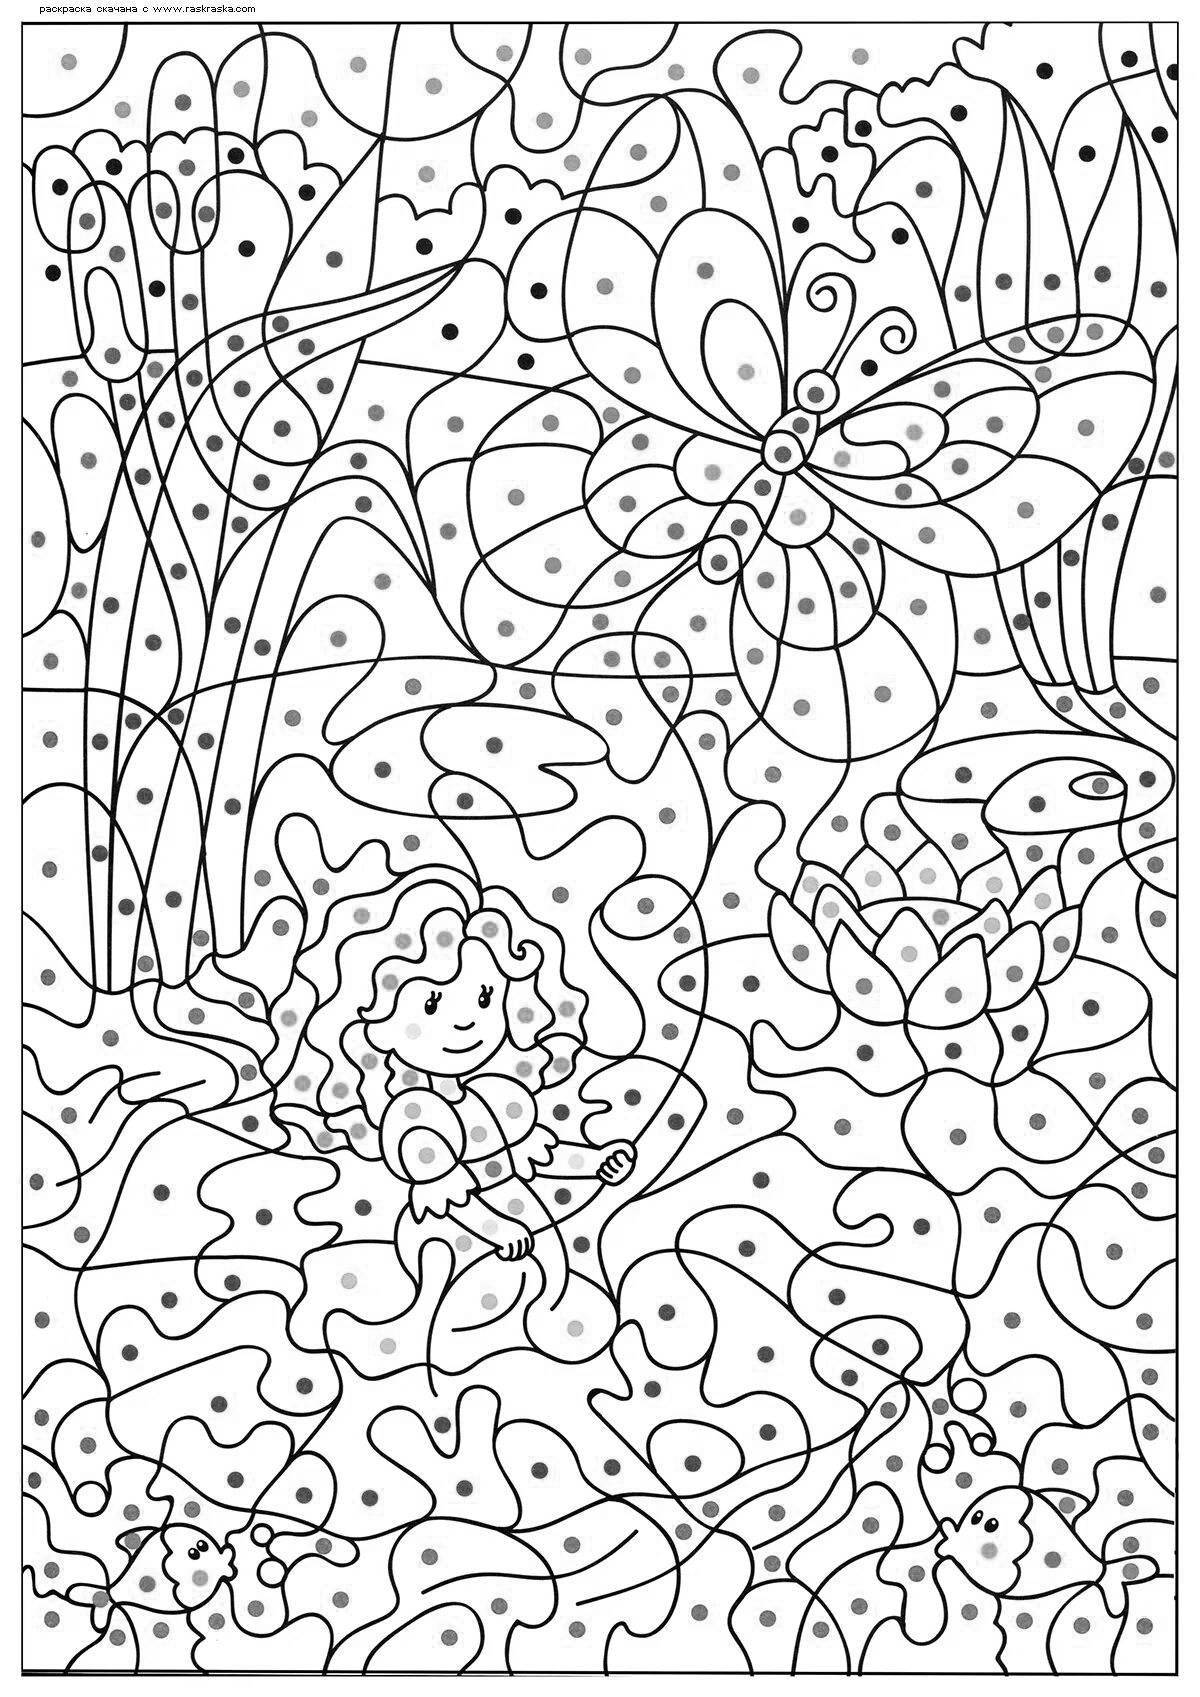 Coloring book happy butterfly by numbers